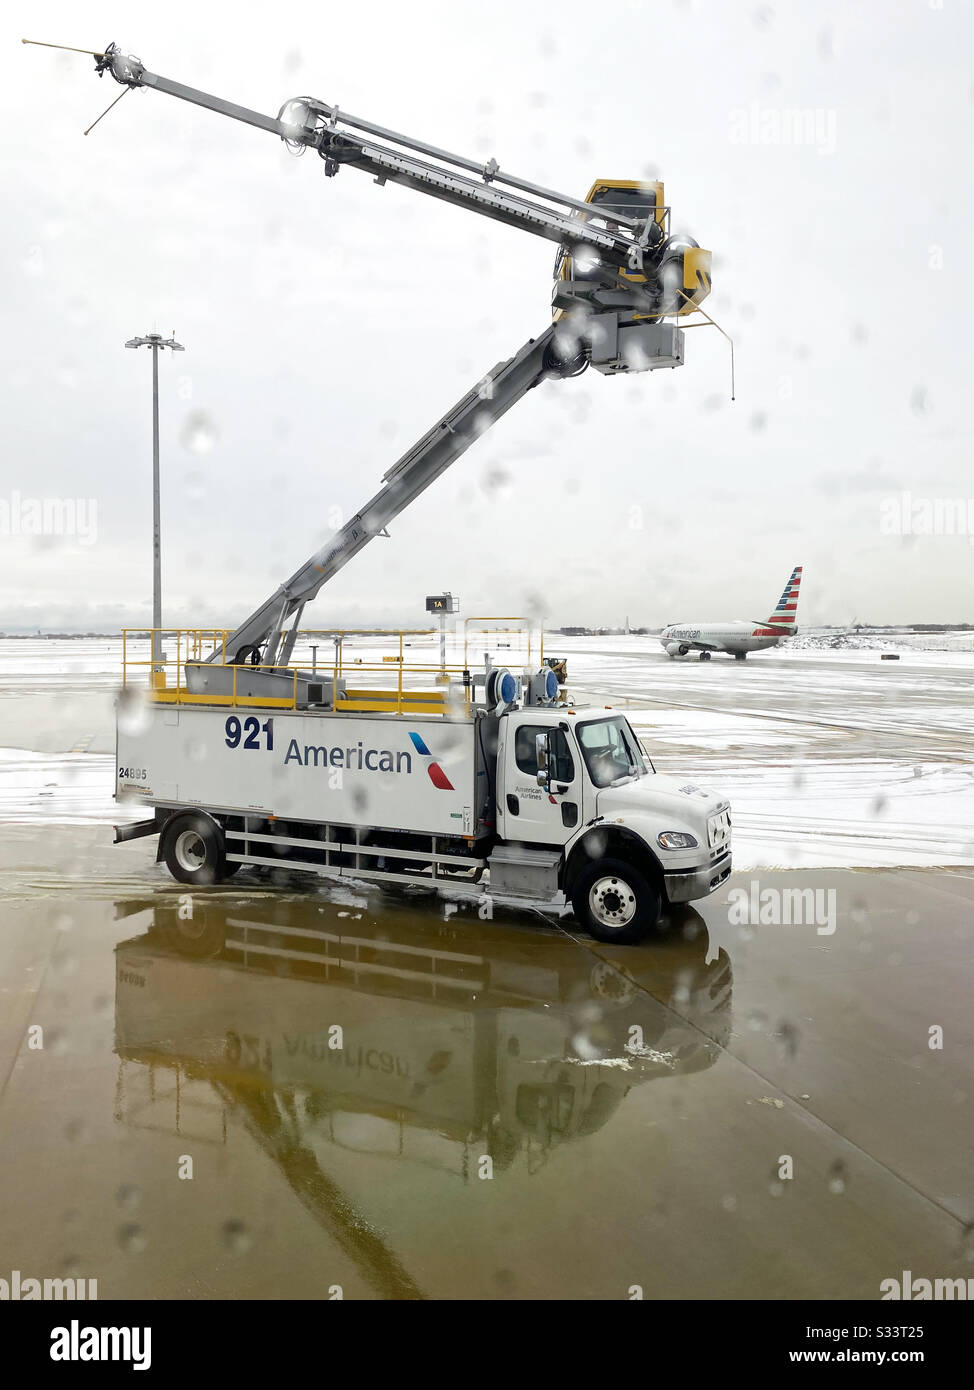 American Airlines deicing truck. Stock Photo